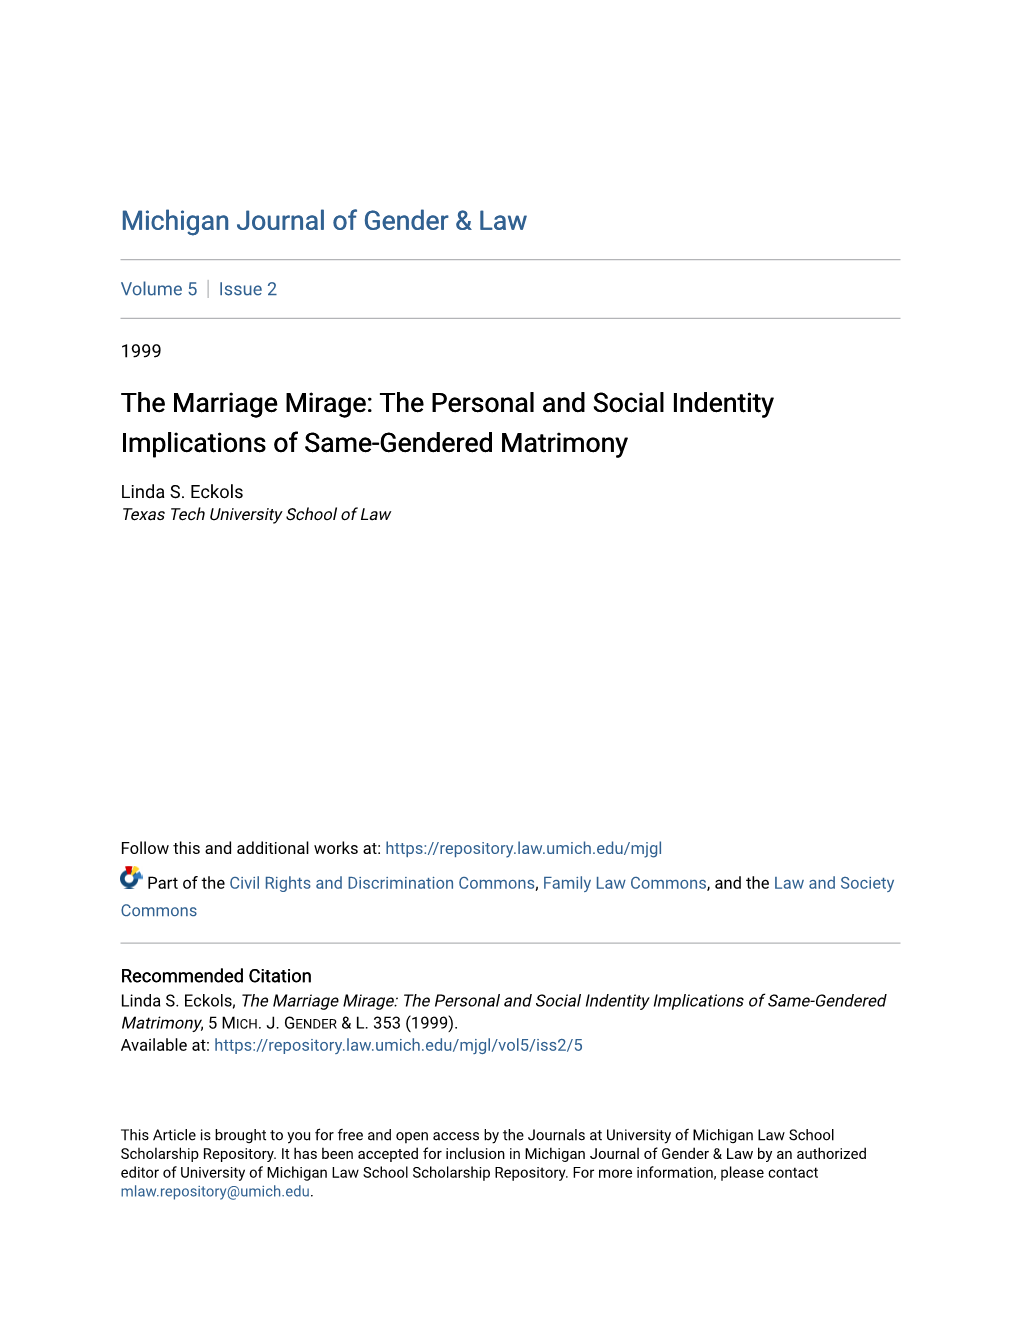 The Marriage Mirage: the Personal and Social Indentity Implications of Same-Gendered Matrimony